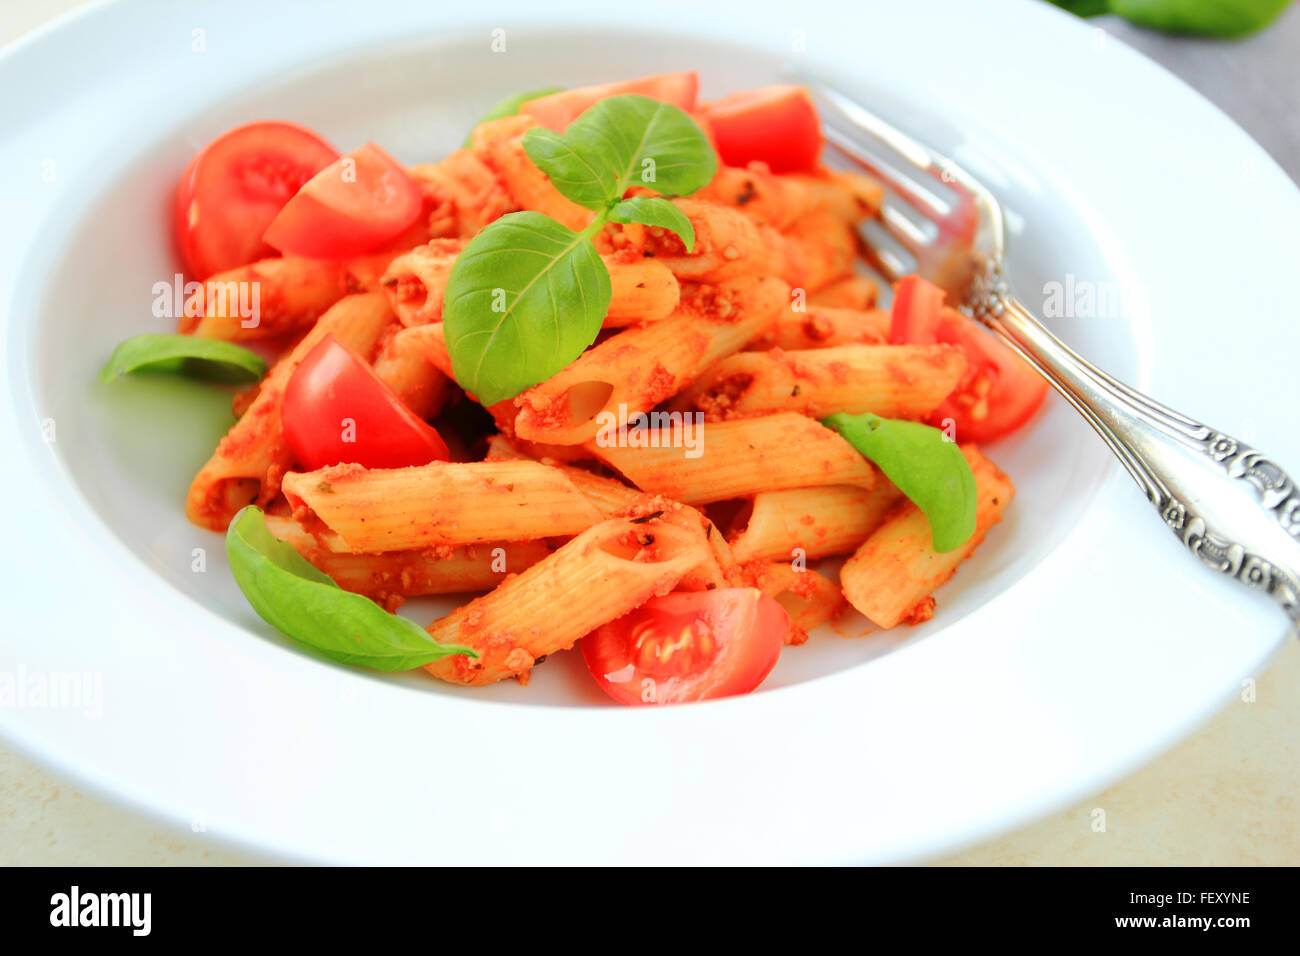 Penne pasta in tomato sauce on white plate Stock Photo